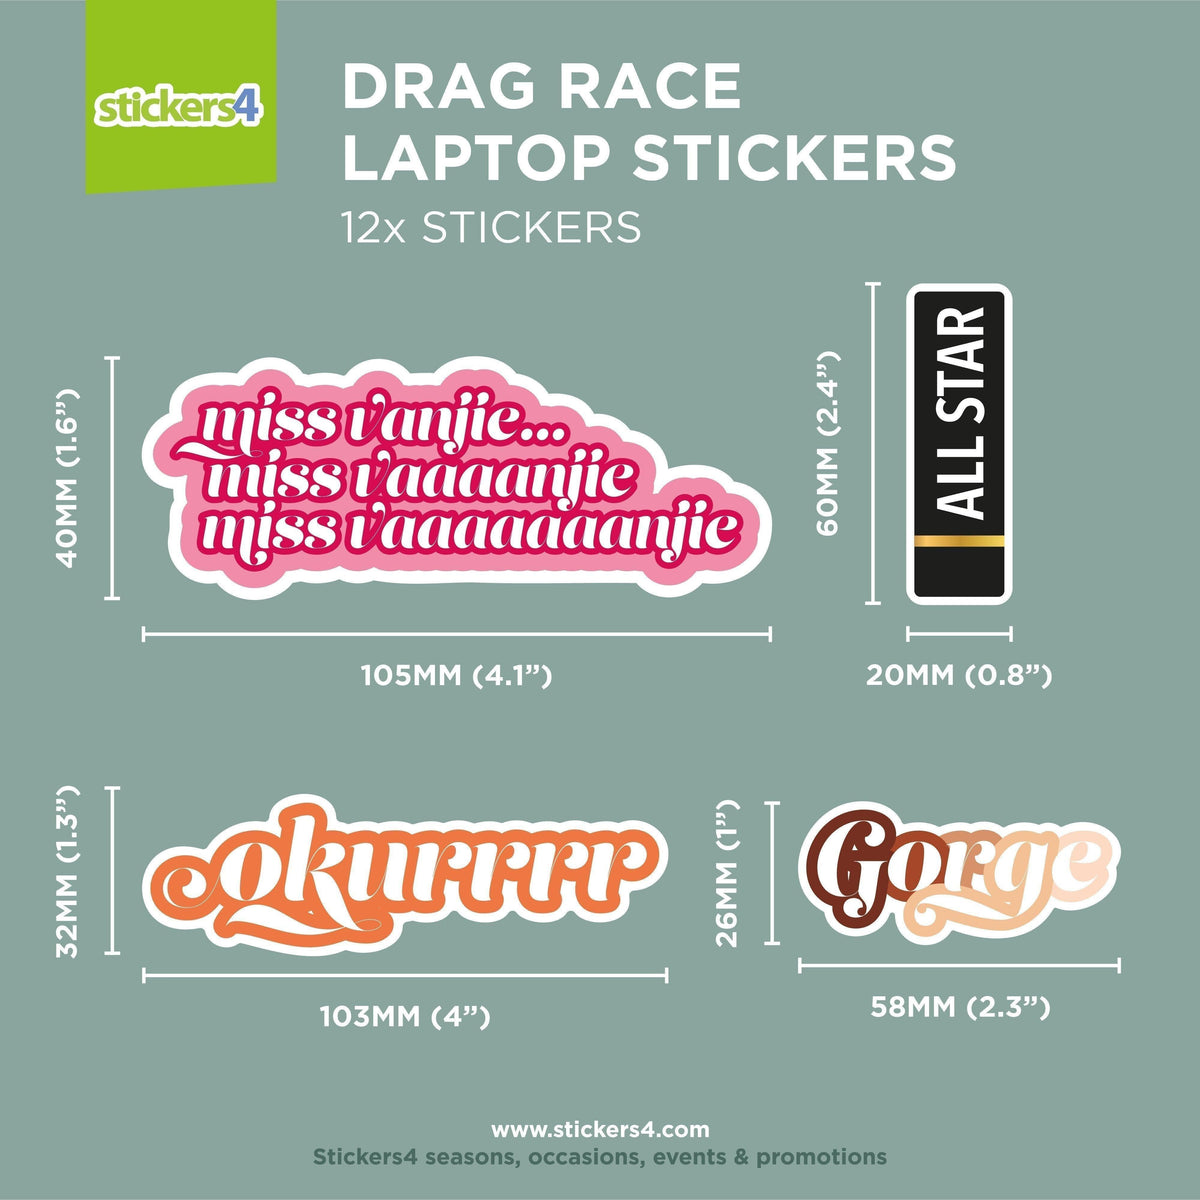 Drag Race Themed Stickers | Pack 2 Laptop Sticker